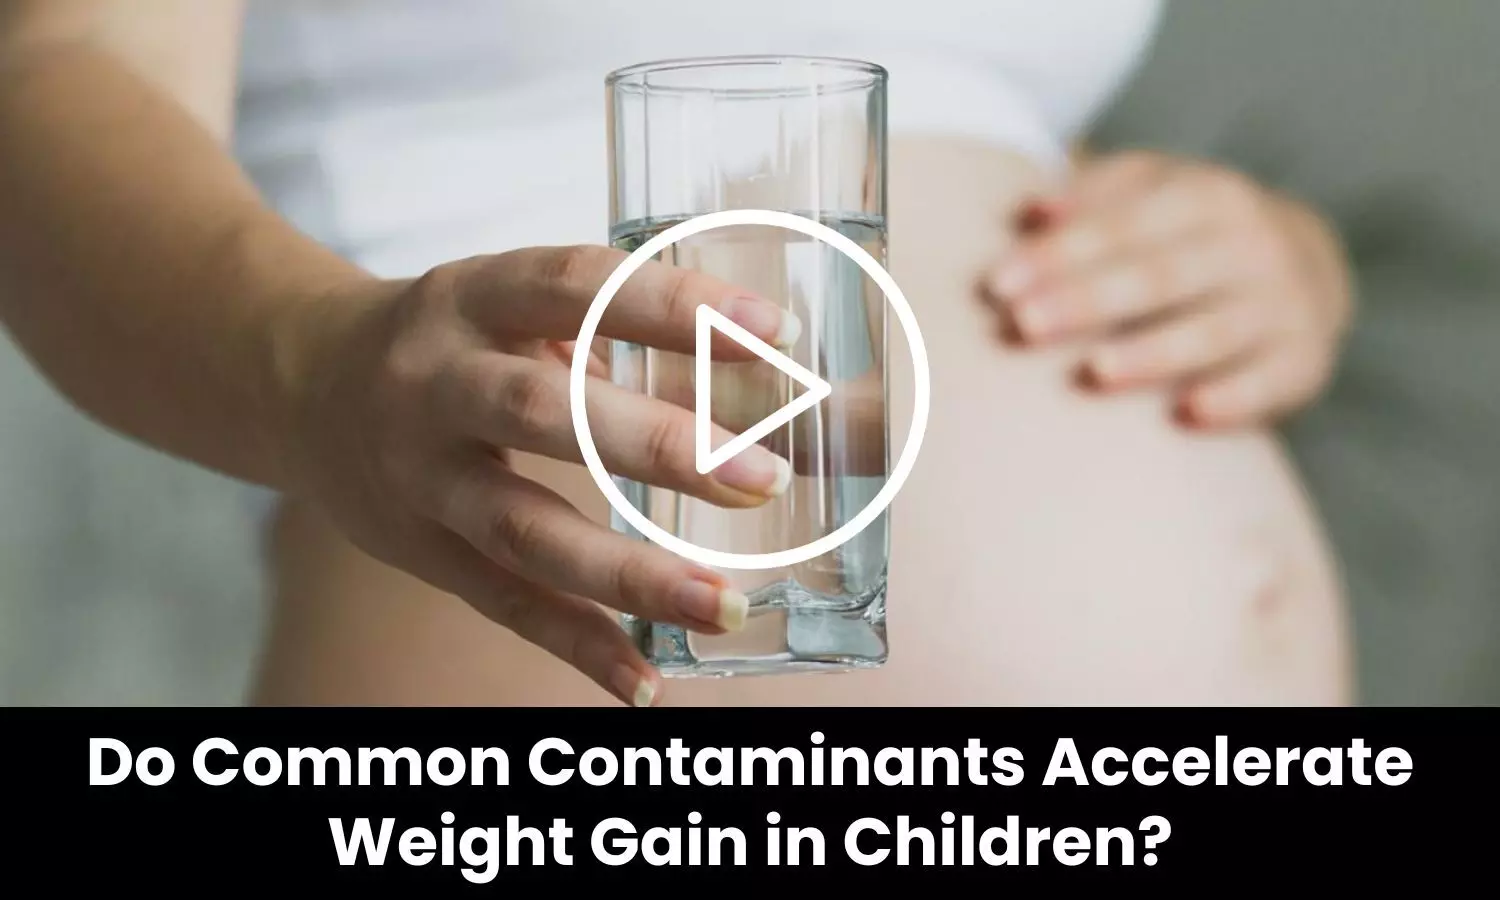 Do Common Contaminants Accelerate Weight Gain in Children?